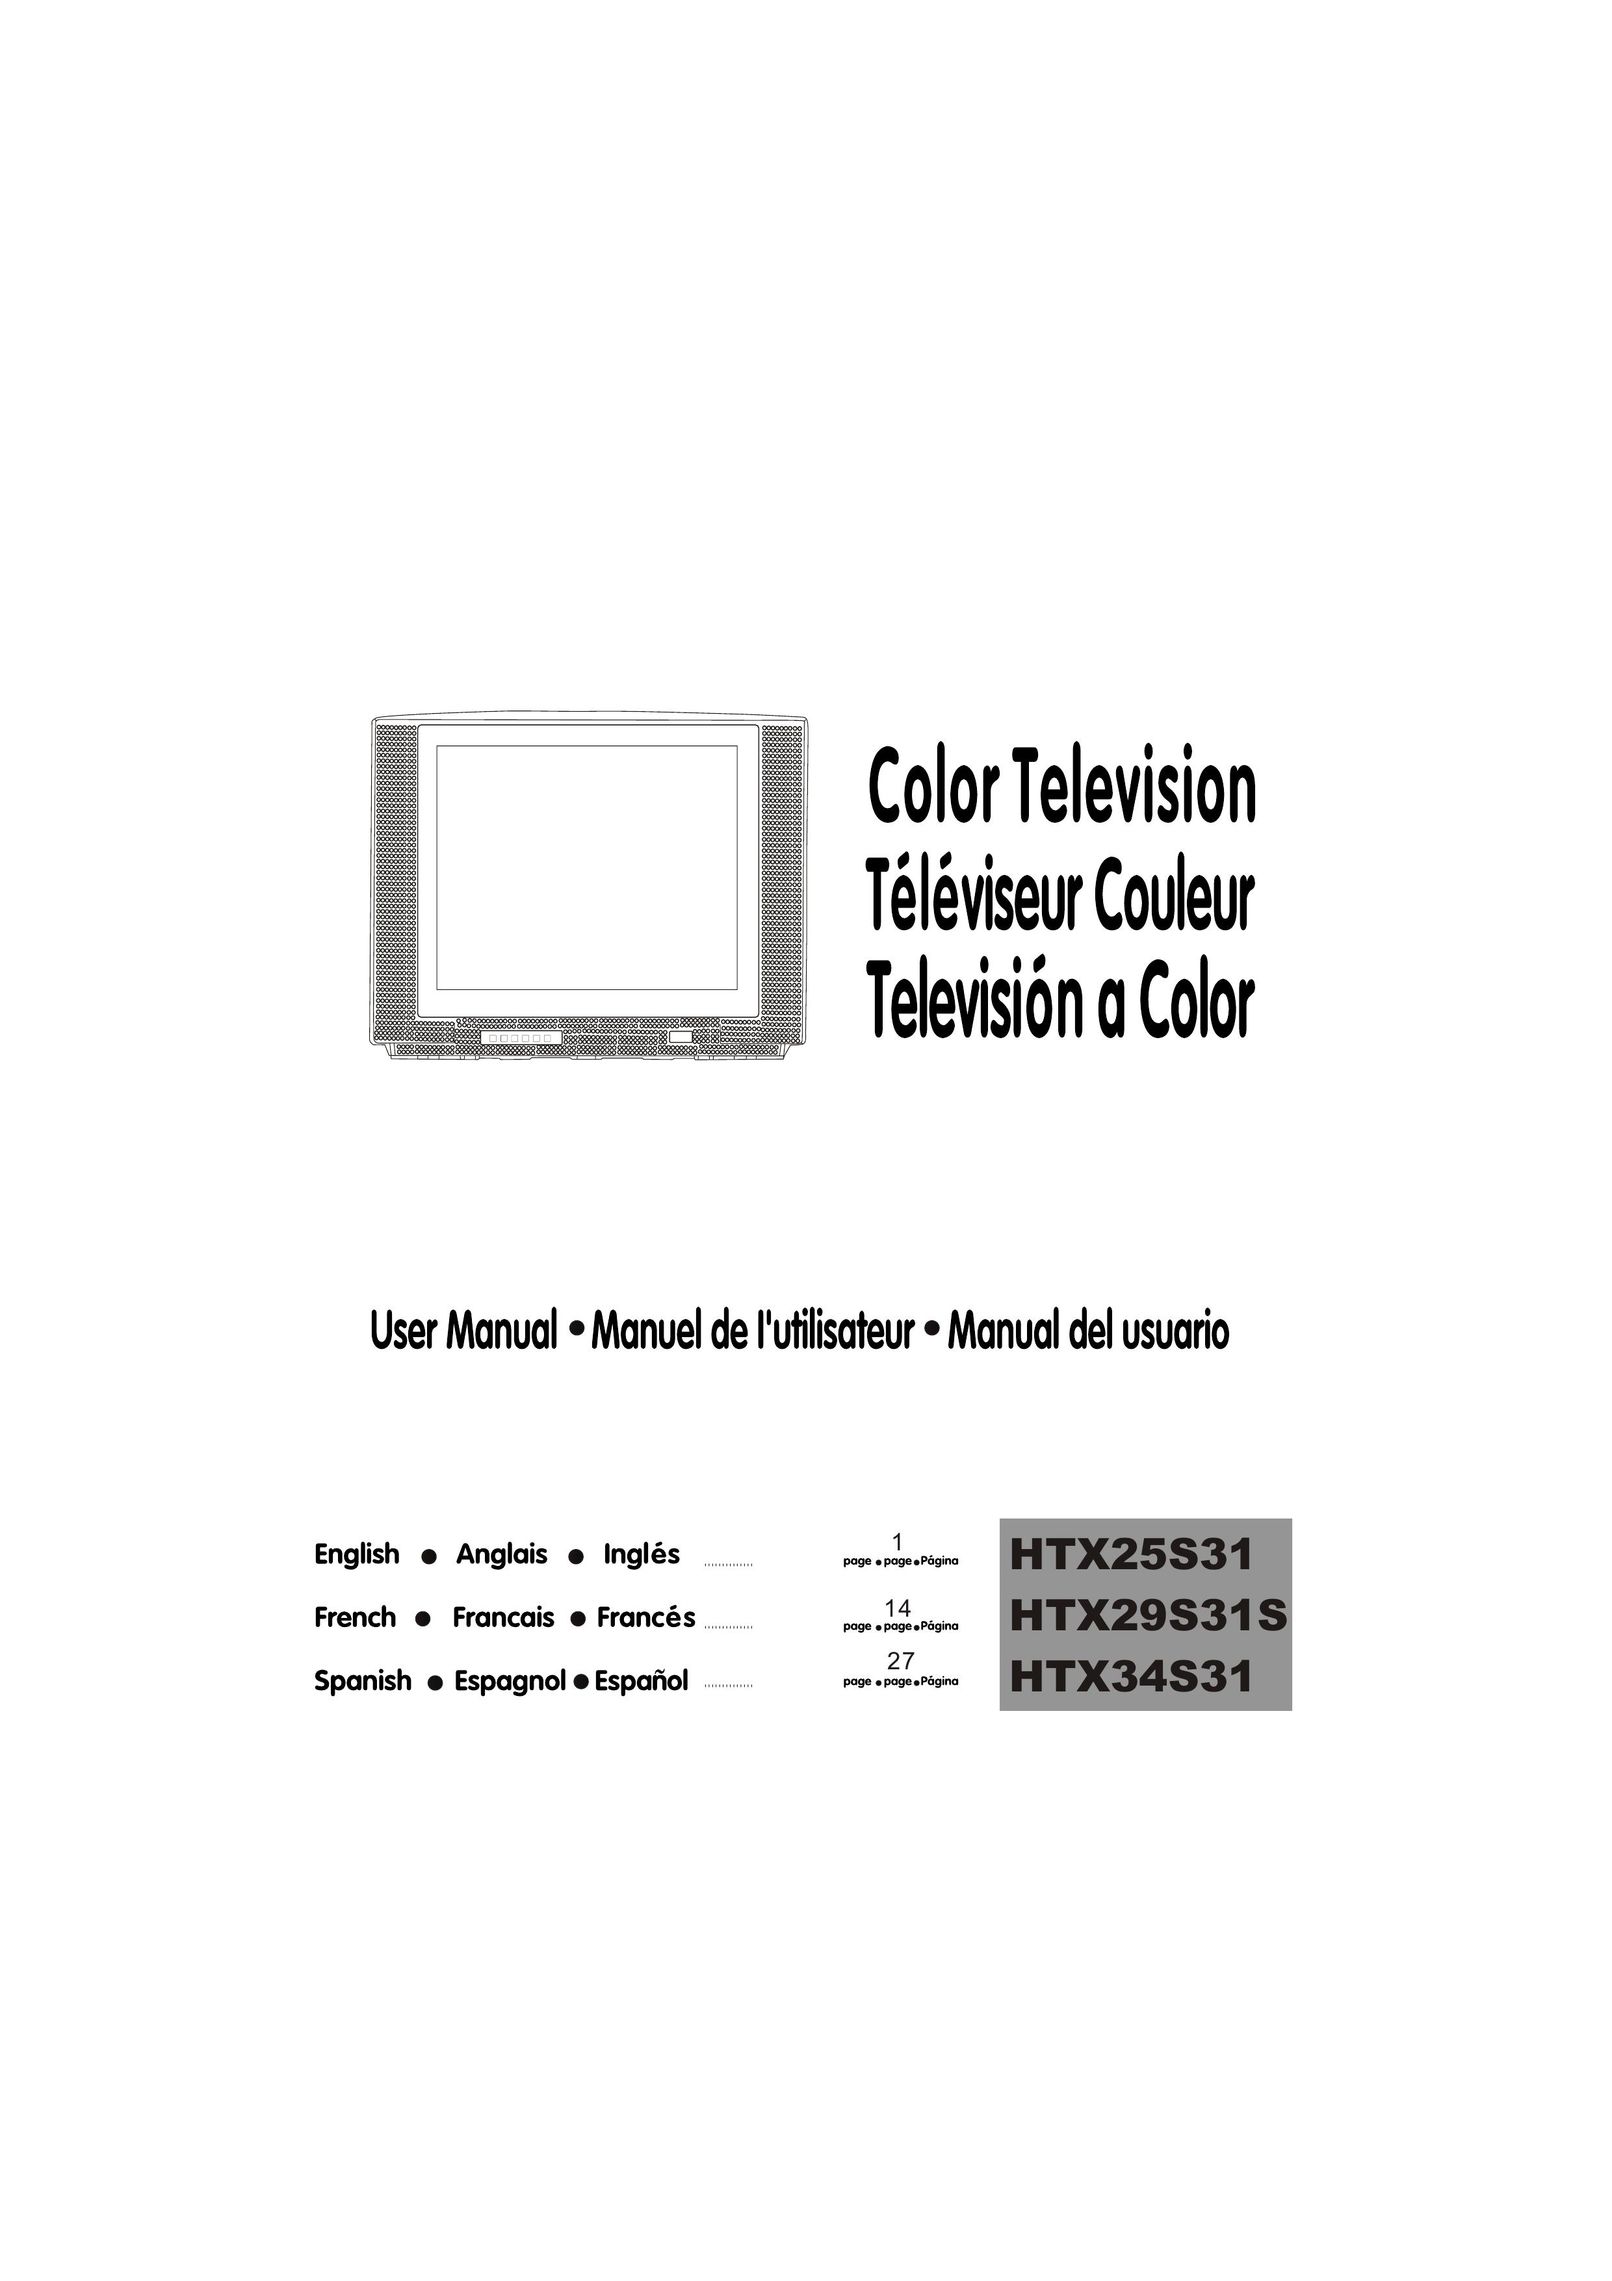 Haier HTX25S31, HTX29S31S, HTX34S31 CRT Television User Manual